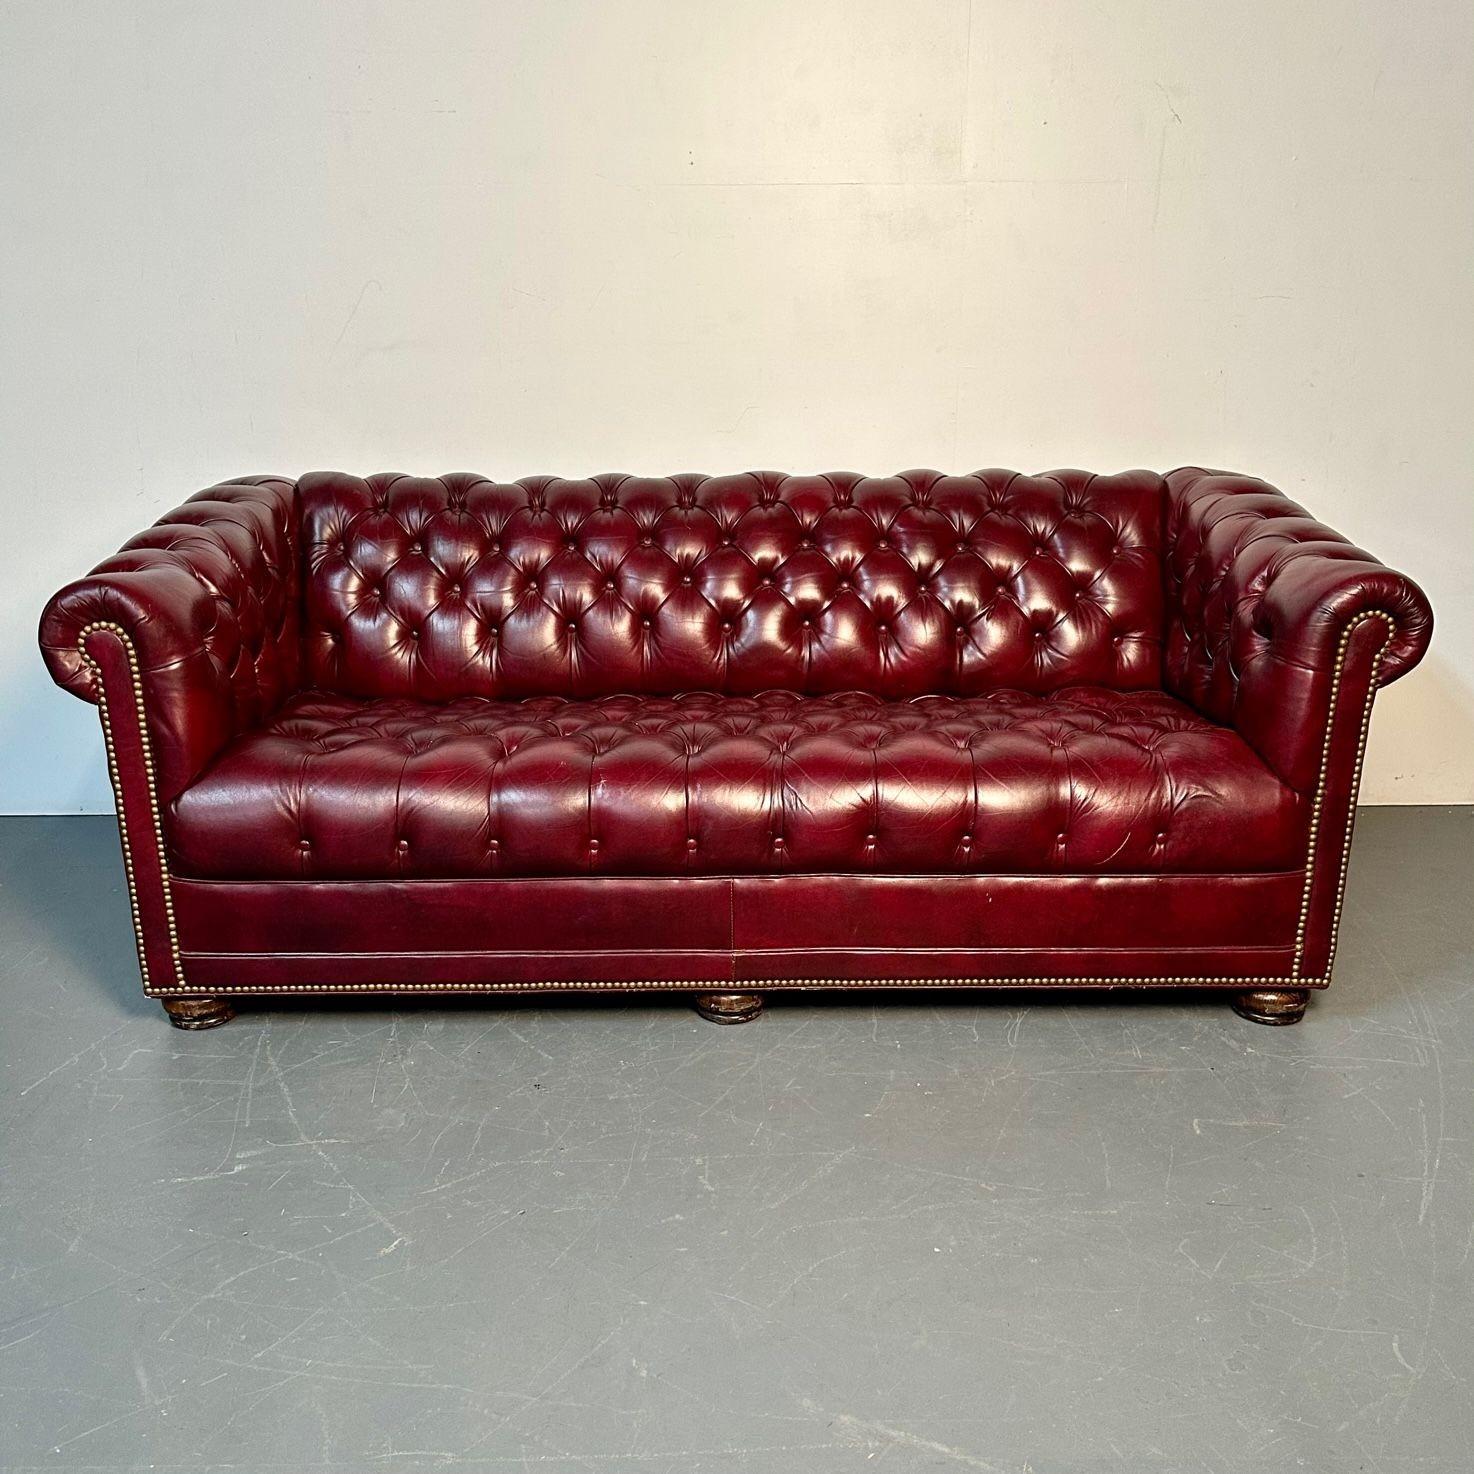 Georgian Oxblood Red Leather Chesterfield Sofa / Settee, Tufted, Bun Feet
 
Very nice Georgian style chesterfield sofa having a tufted red oxblood upper sitting on 6 brown mahogany bun shaped feet. The entire back, armrests, and seat cushion is